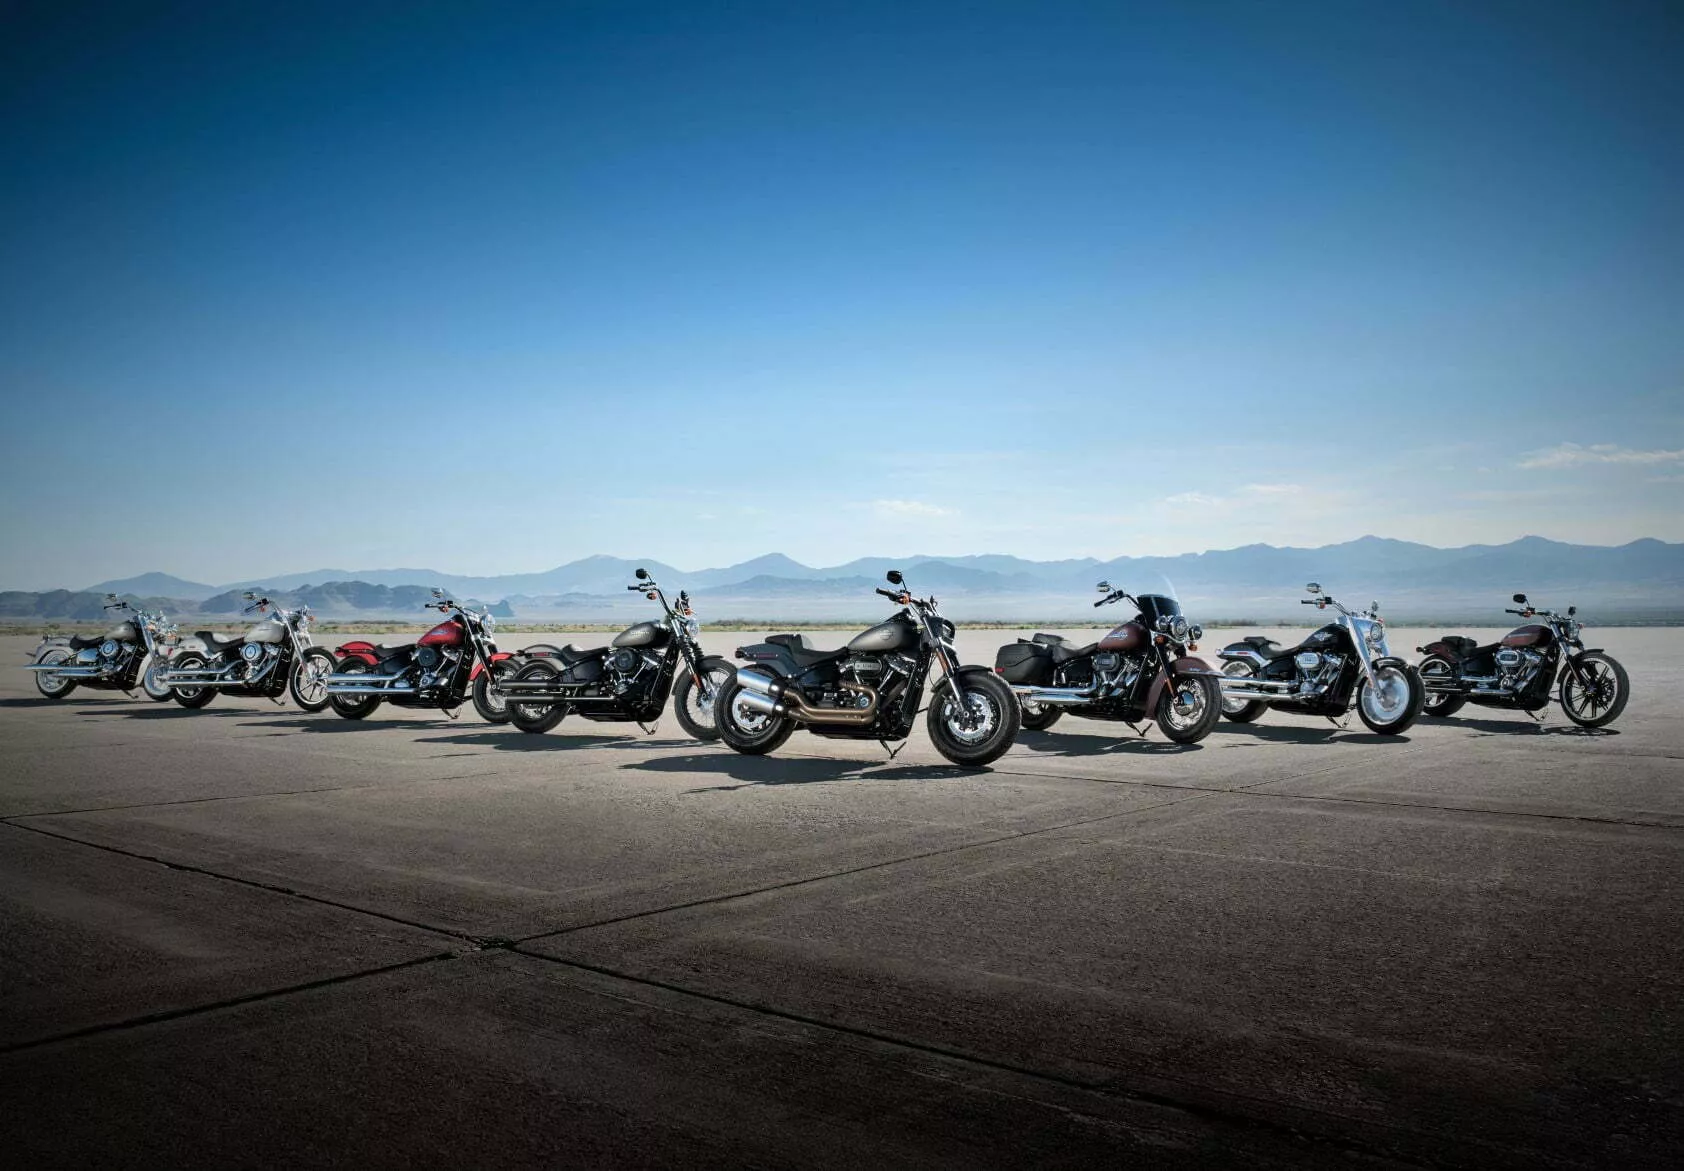 One of the biggest splashes of the past decade was Harley’s launch of the reinvented Softail line in 2018, with eight models coming online all at once.